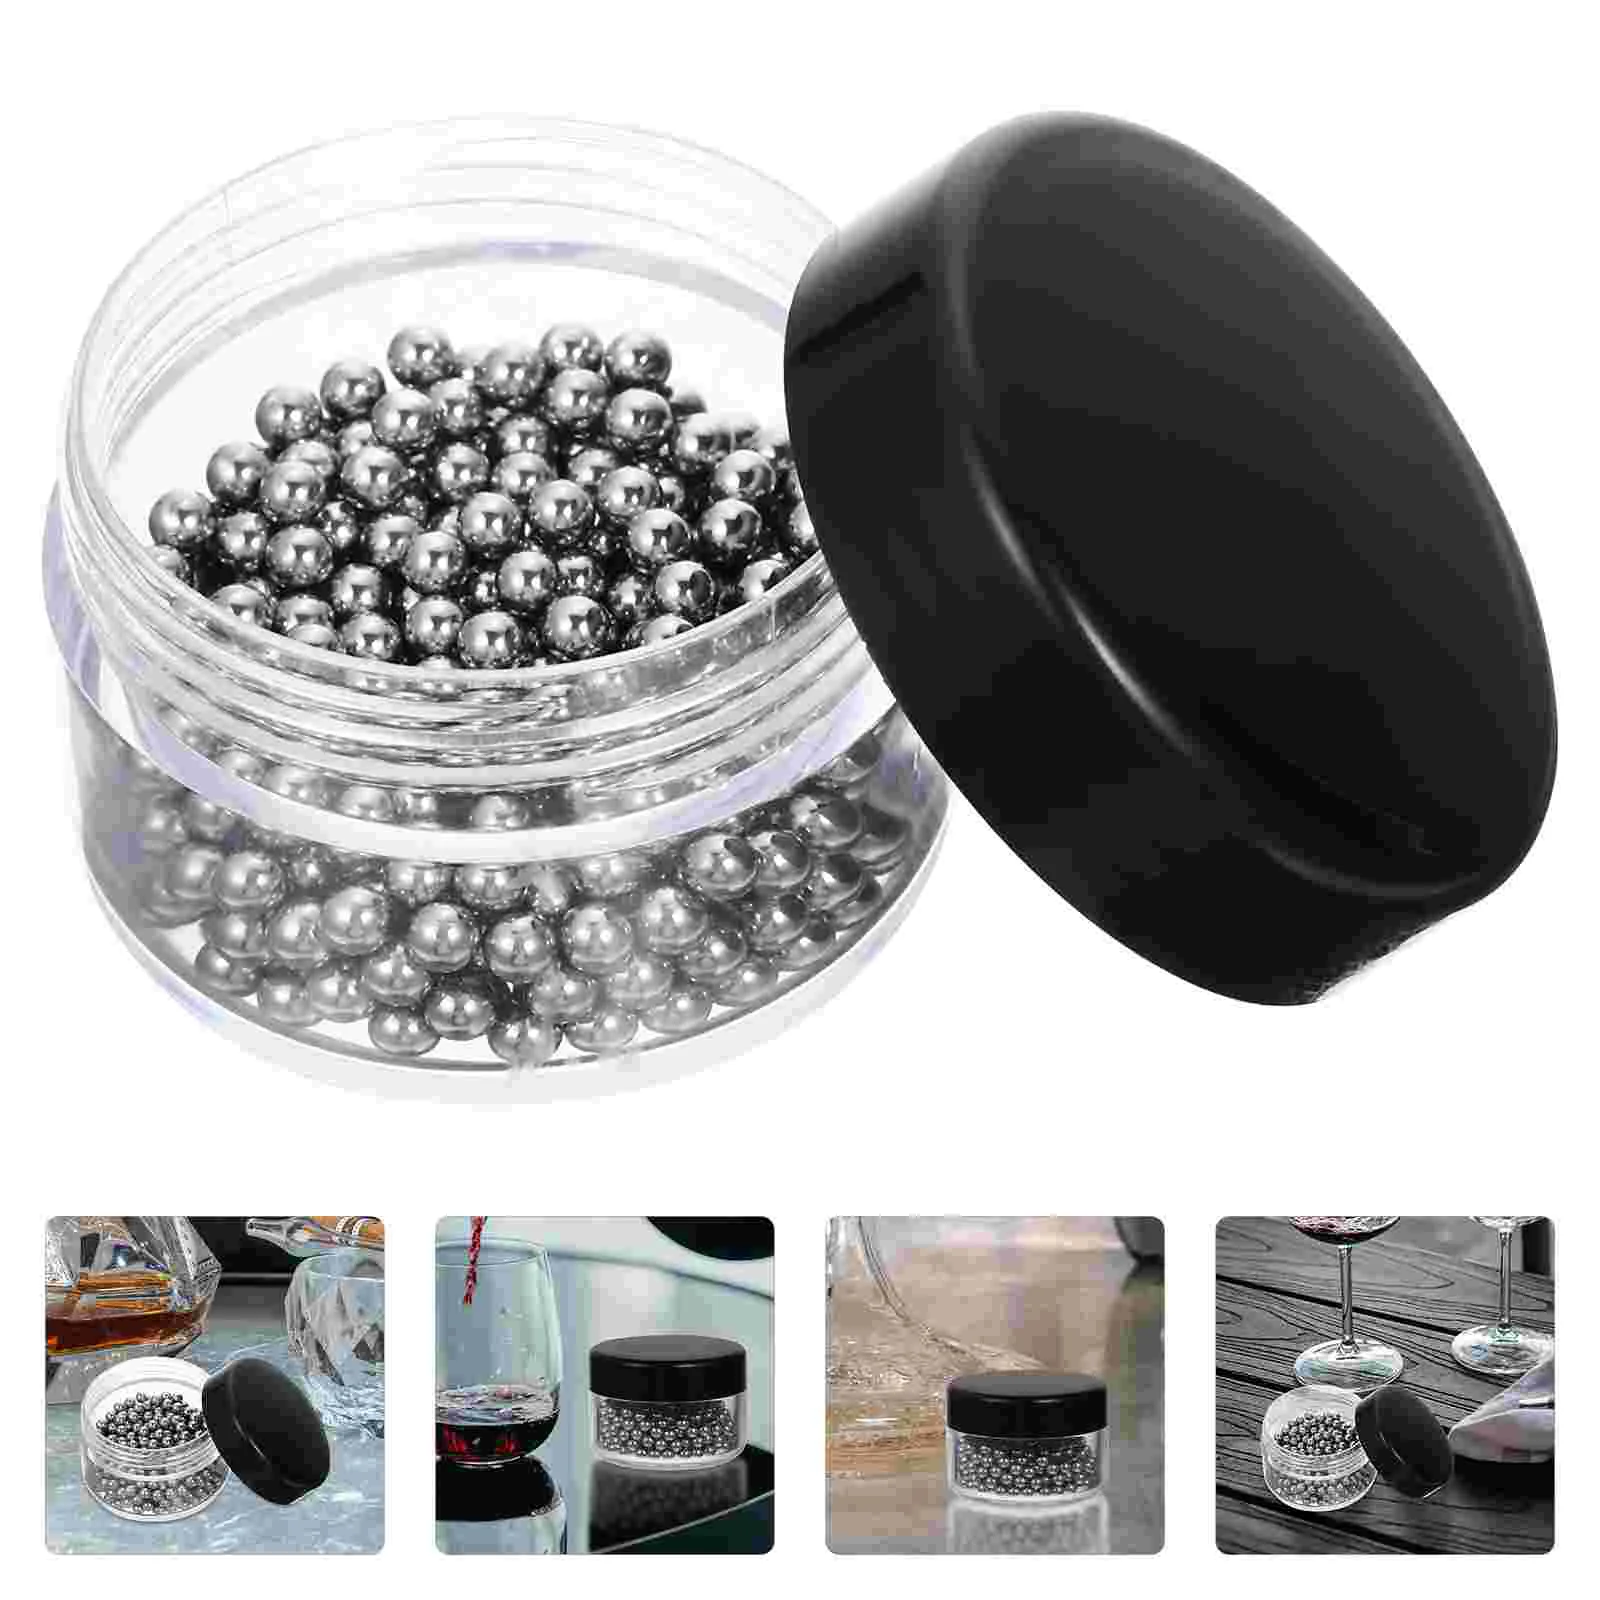 

400 Pcs Metal Simple Decanter Cleaning Beads Magnetic Balls Clean Beads for Decanter Cleaning